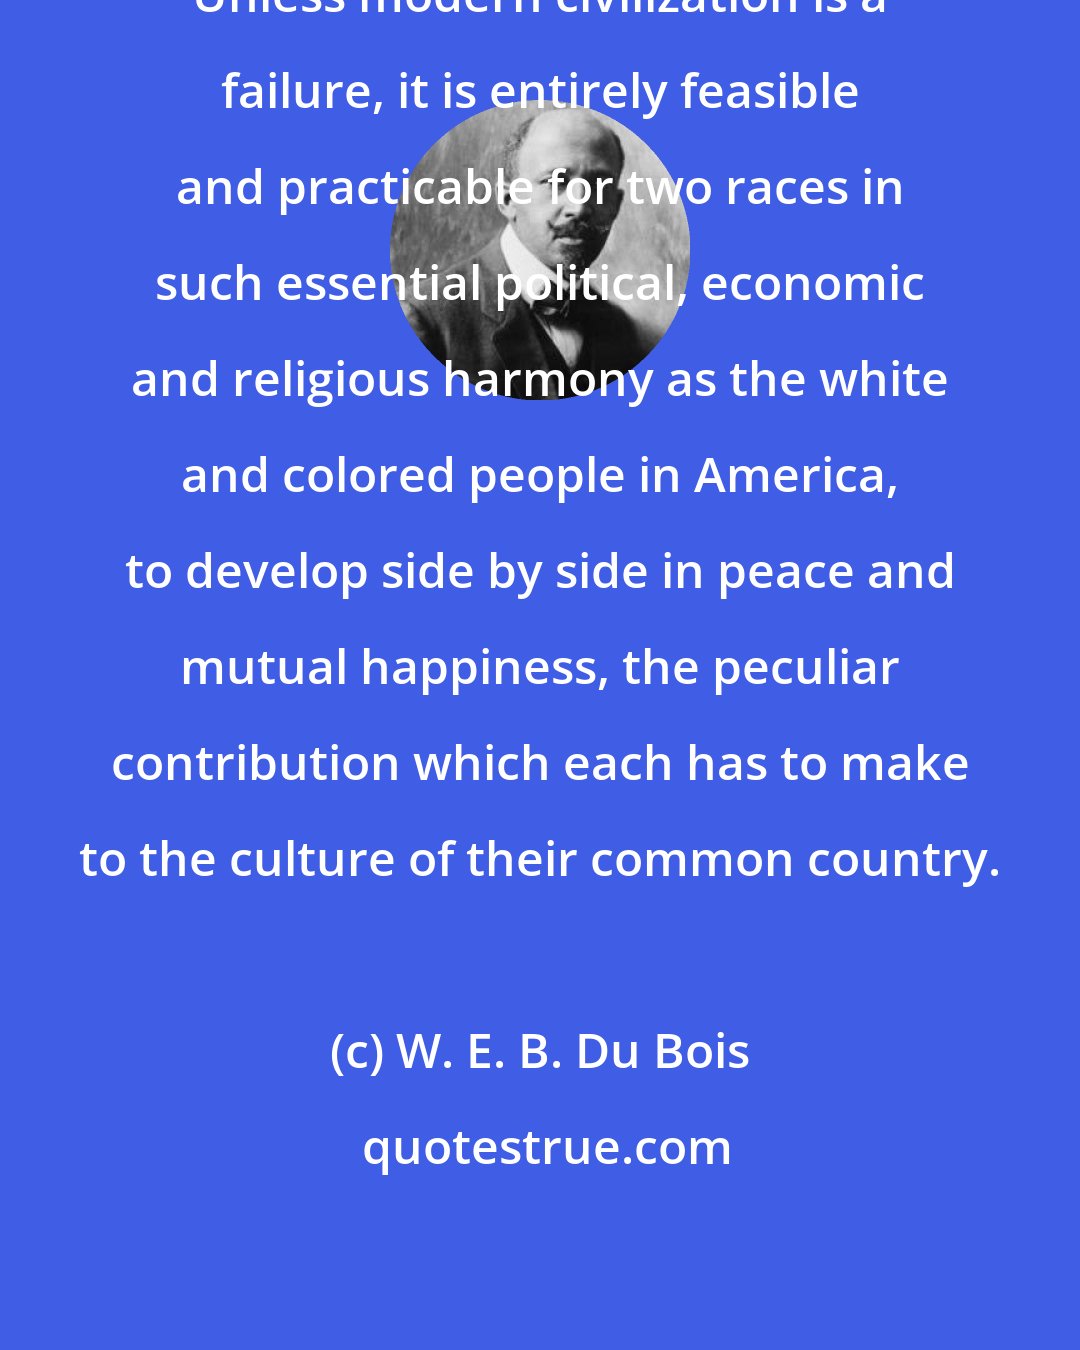 W. E. B. Du Bois: Unless modern civilization is a failure, it is entirely feasible and practicable for two races in such essential political, economic and religious harmony as the white and colored people in America, to develop side by side in peace and mutual happiness, the peculiar contribution which each has to make to the culture of their common country.